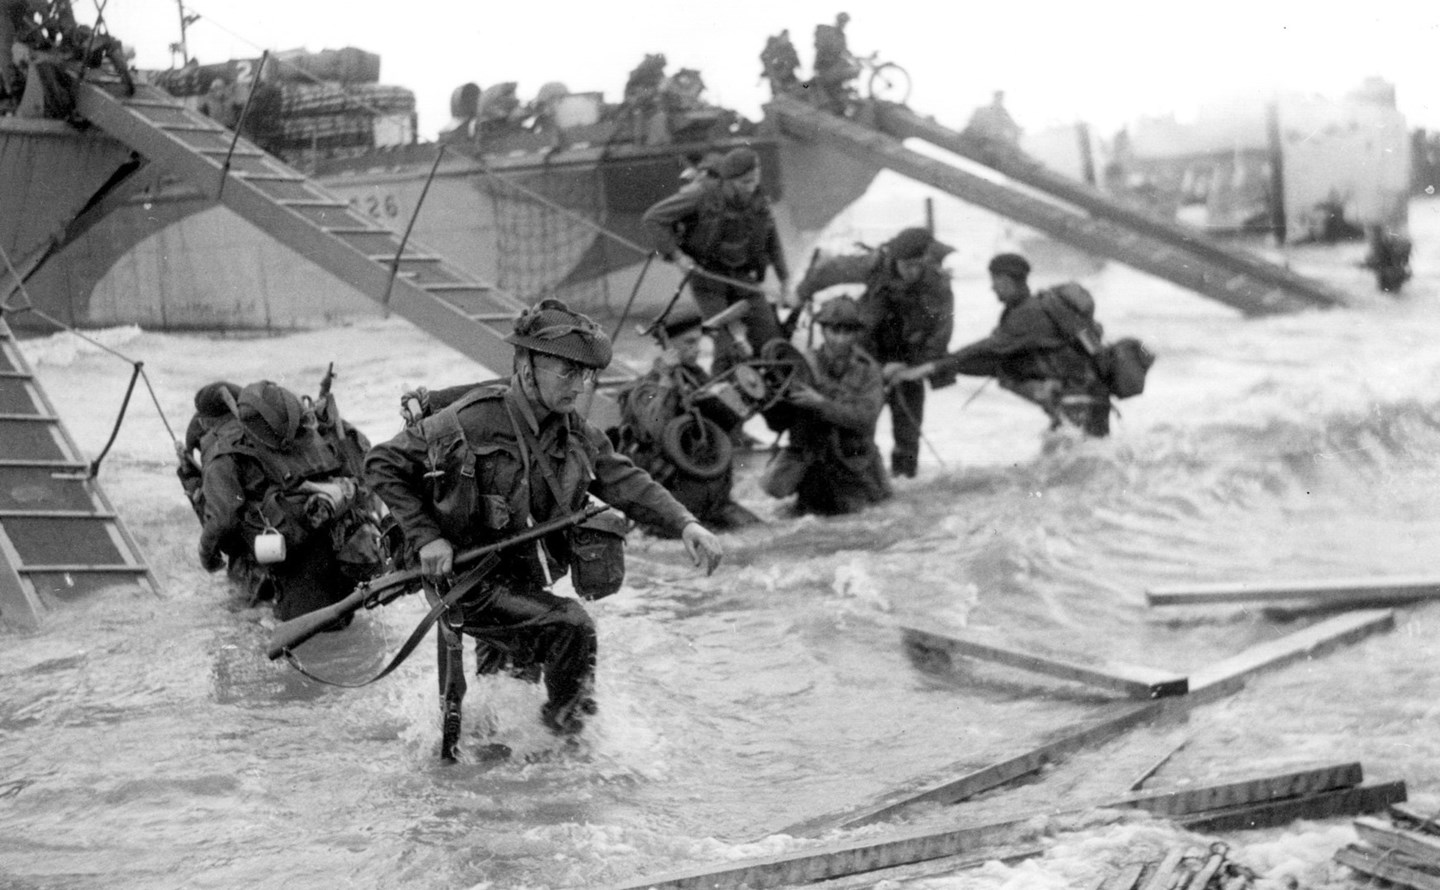 British troops landing on the beach at D-Day